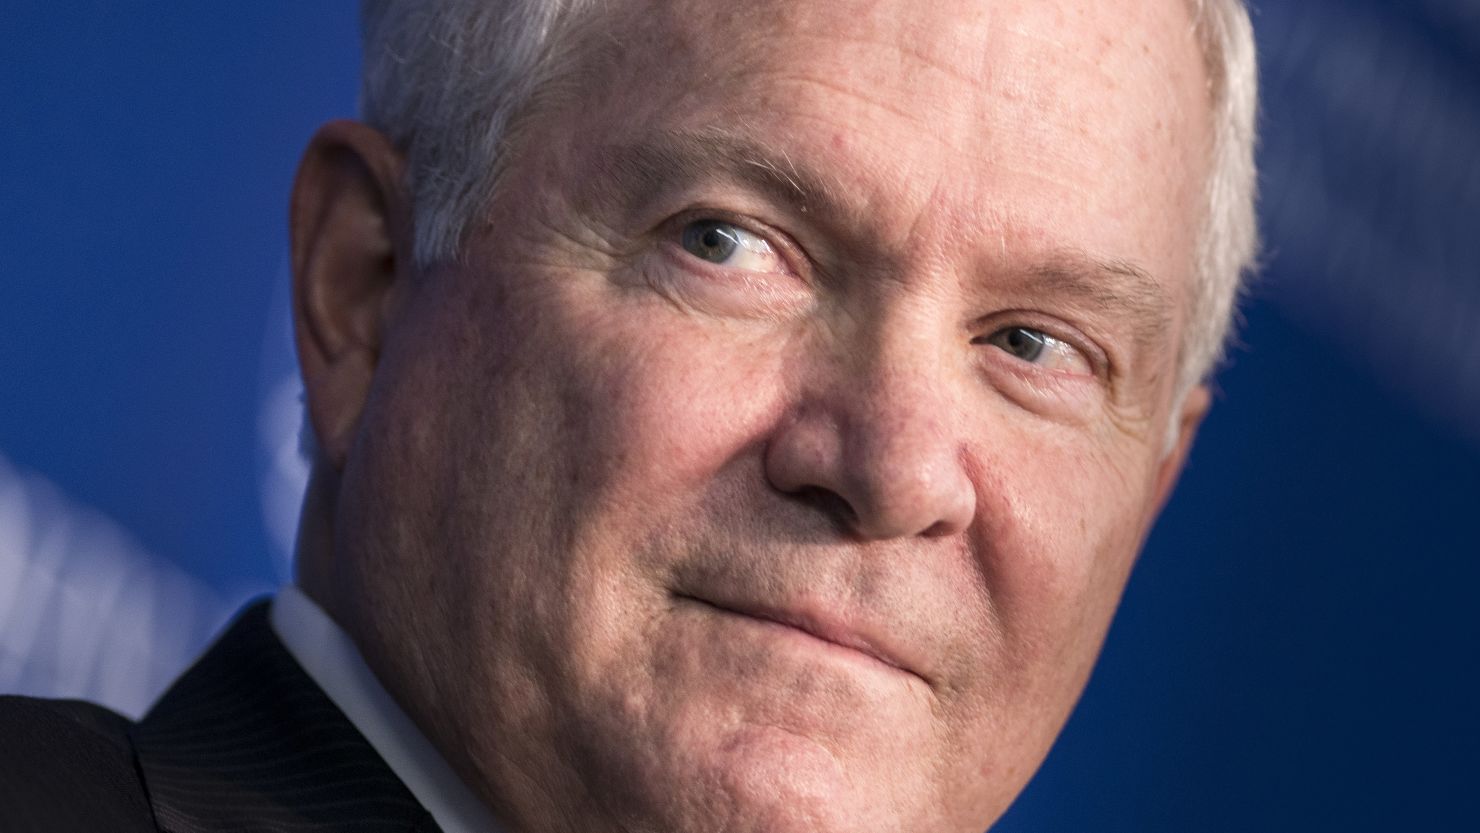 A former Eagle Scout, ex-Defense Secretary Robert Gates was named Boy Scouts of America president-elect.